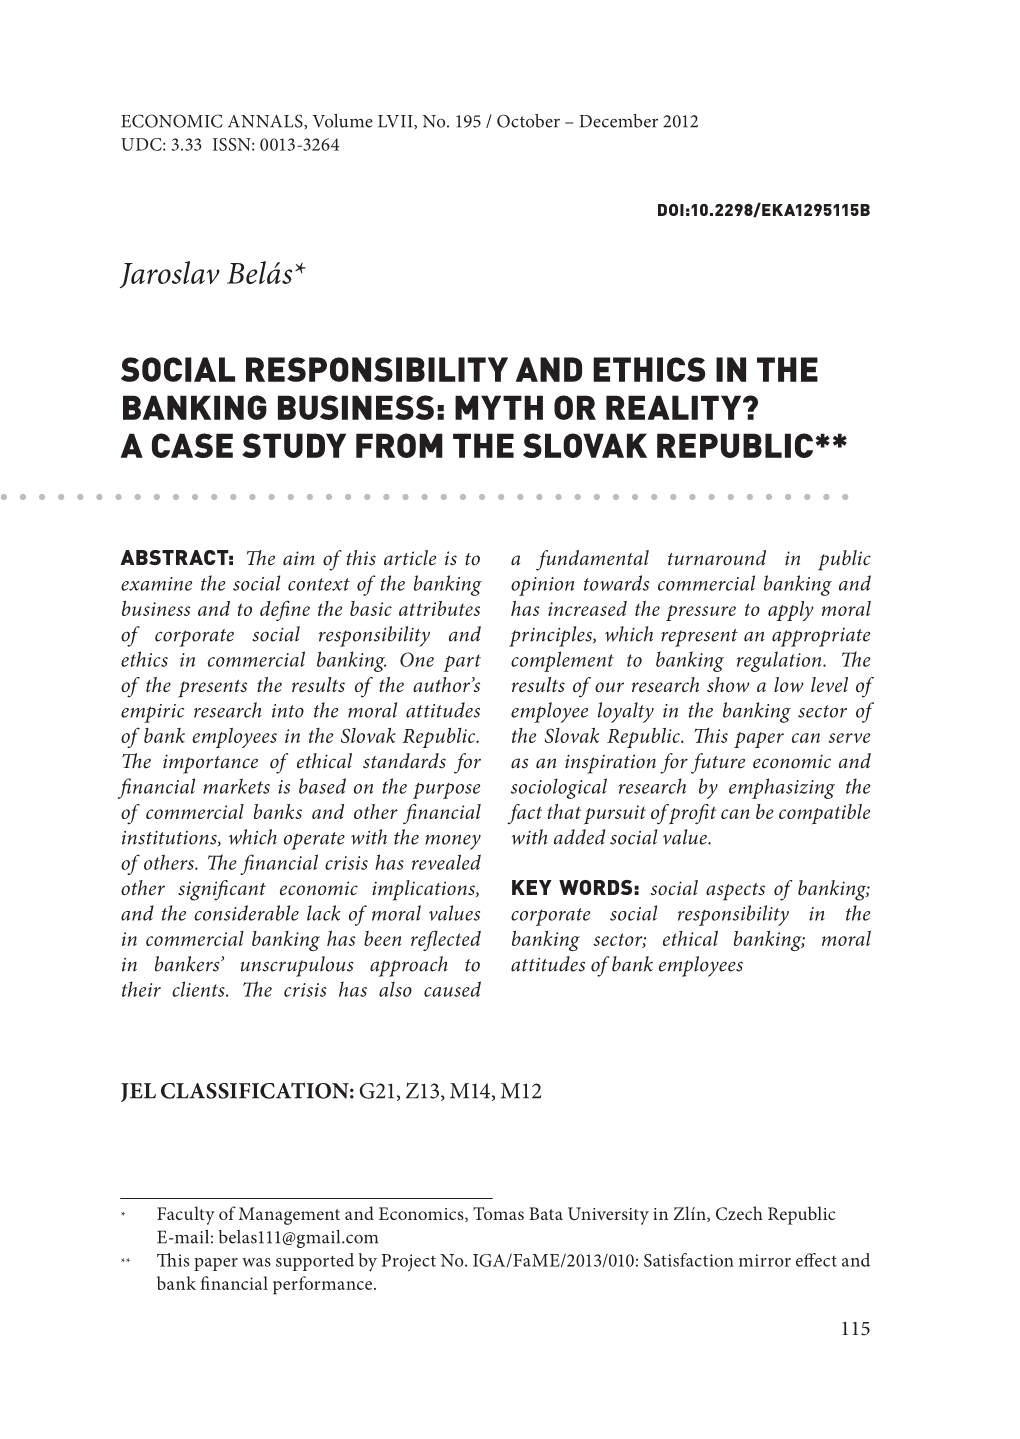 Social Responsibility and Ethics in the Banking Business: Myth Or Reality? a Case Study from the Slovak Republic**